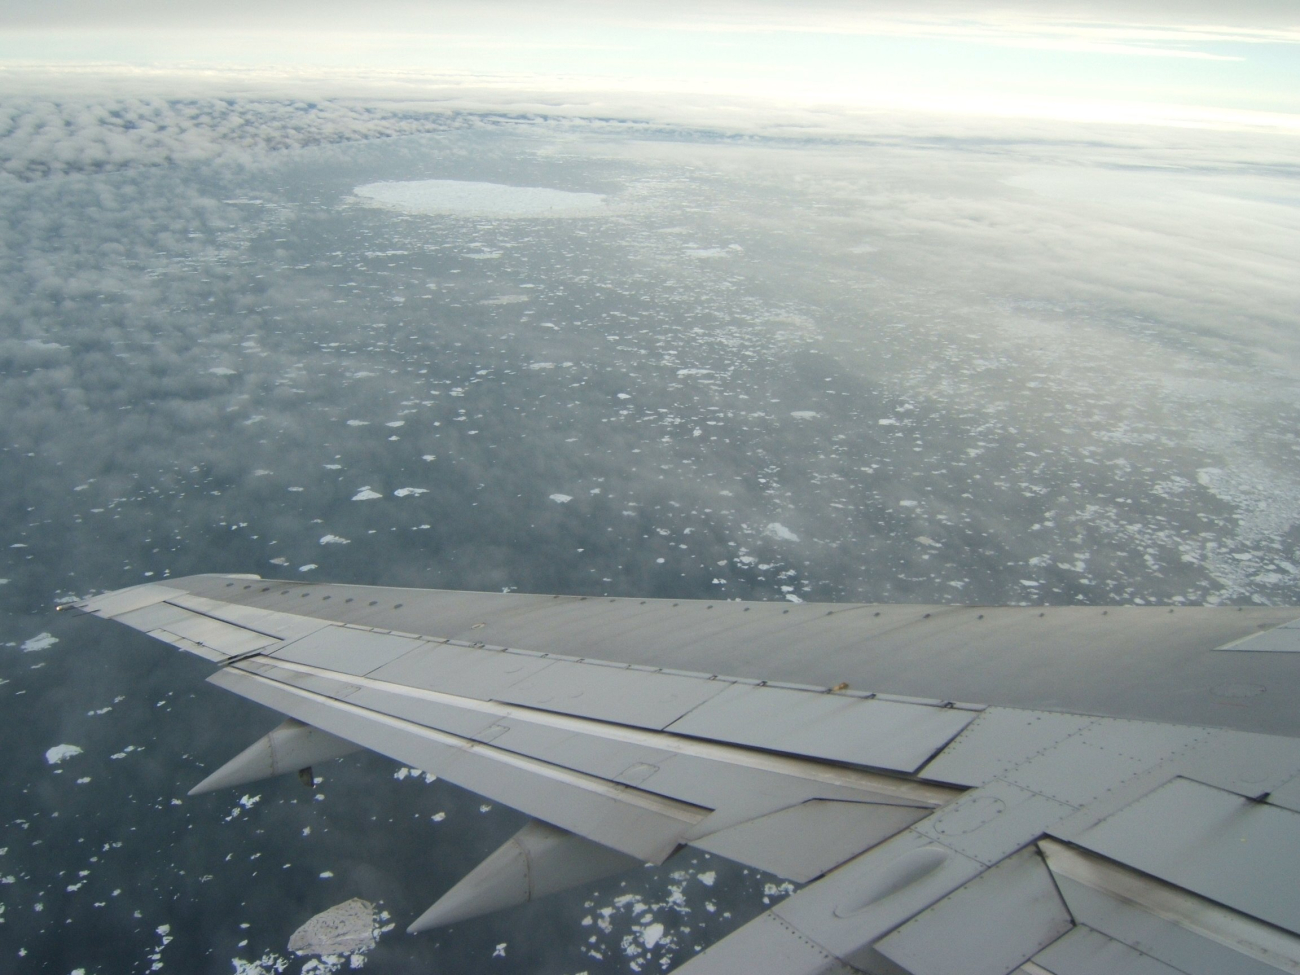 Flying over the Beaufort Sea turning for approach to Barrow